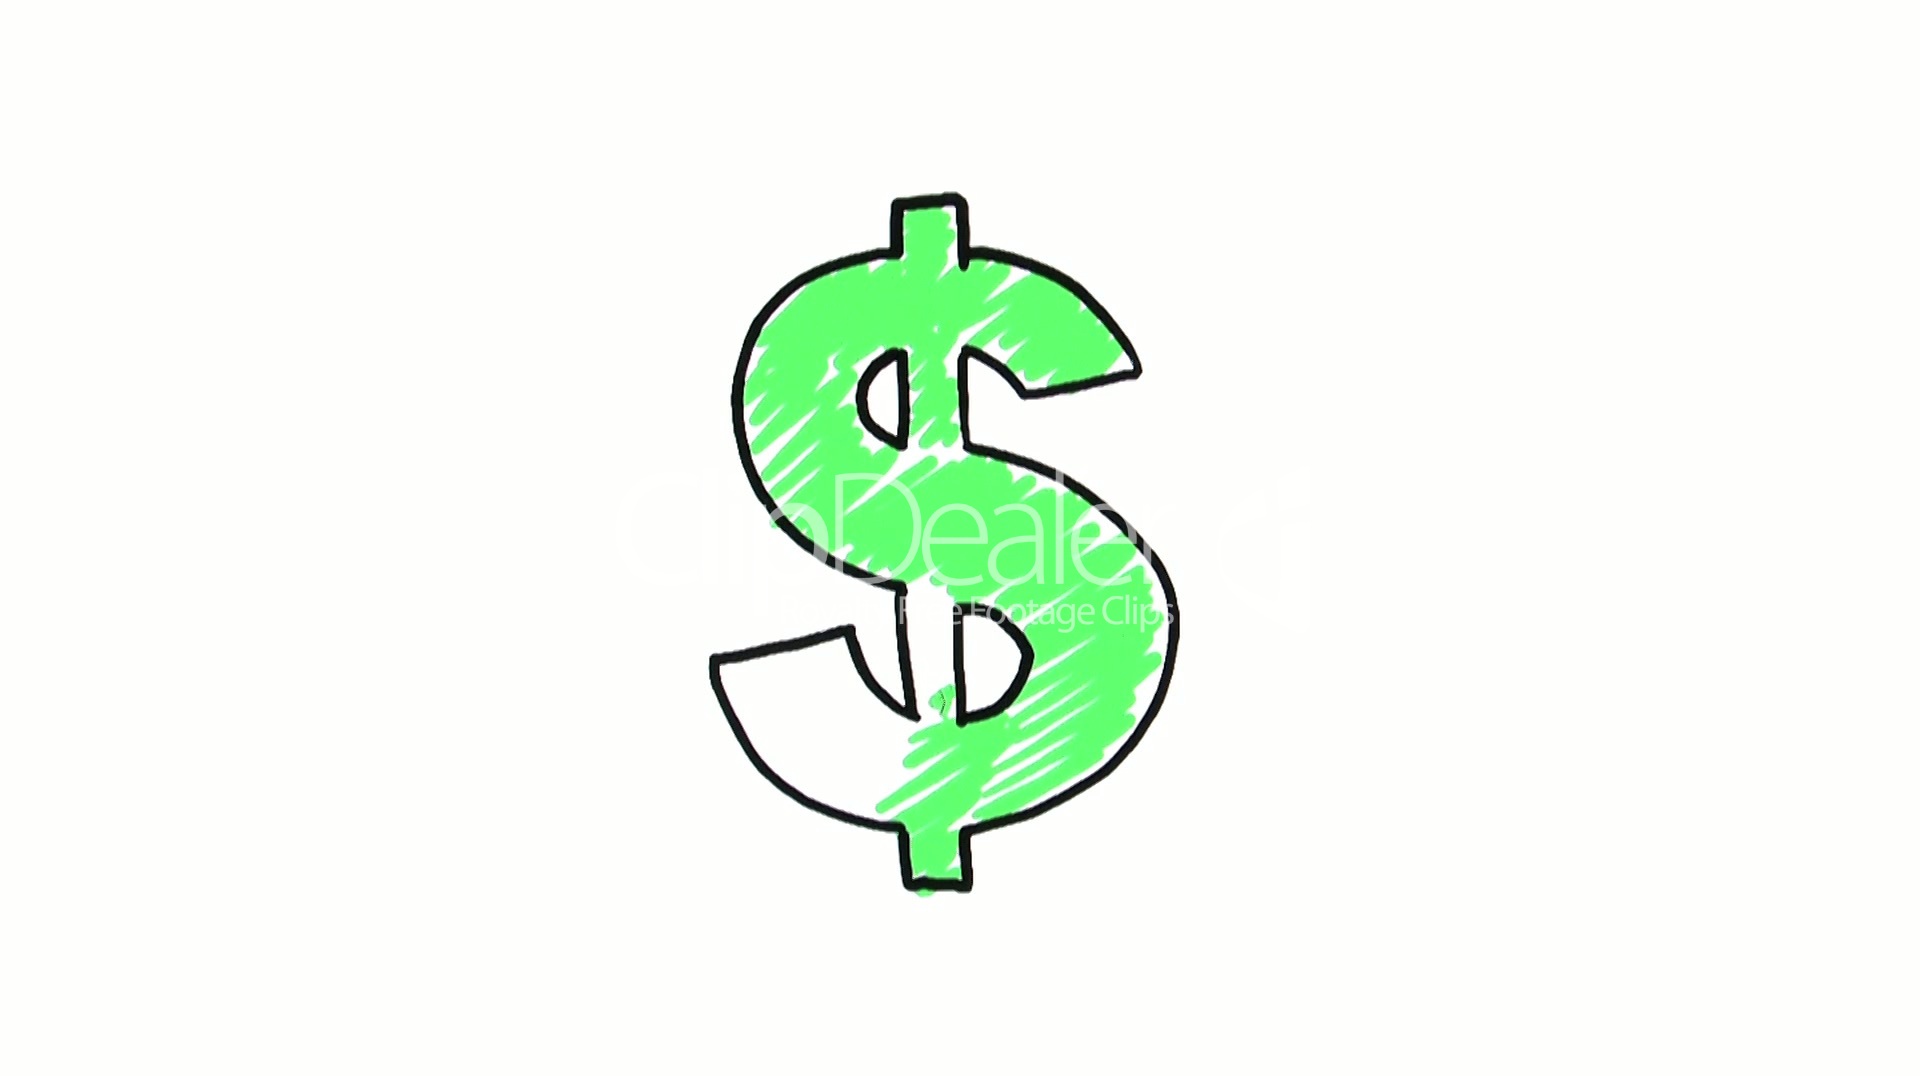 How To Draw A Dollar Sign